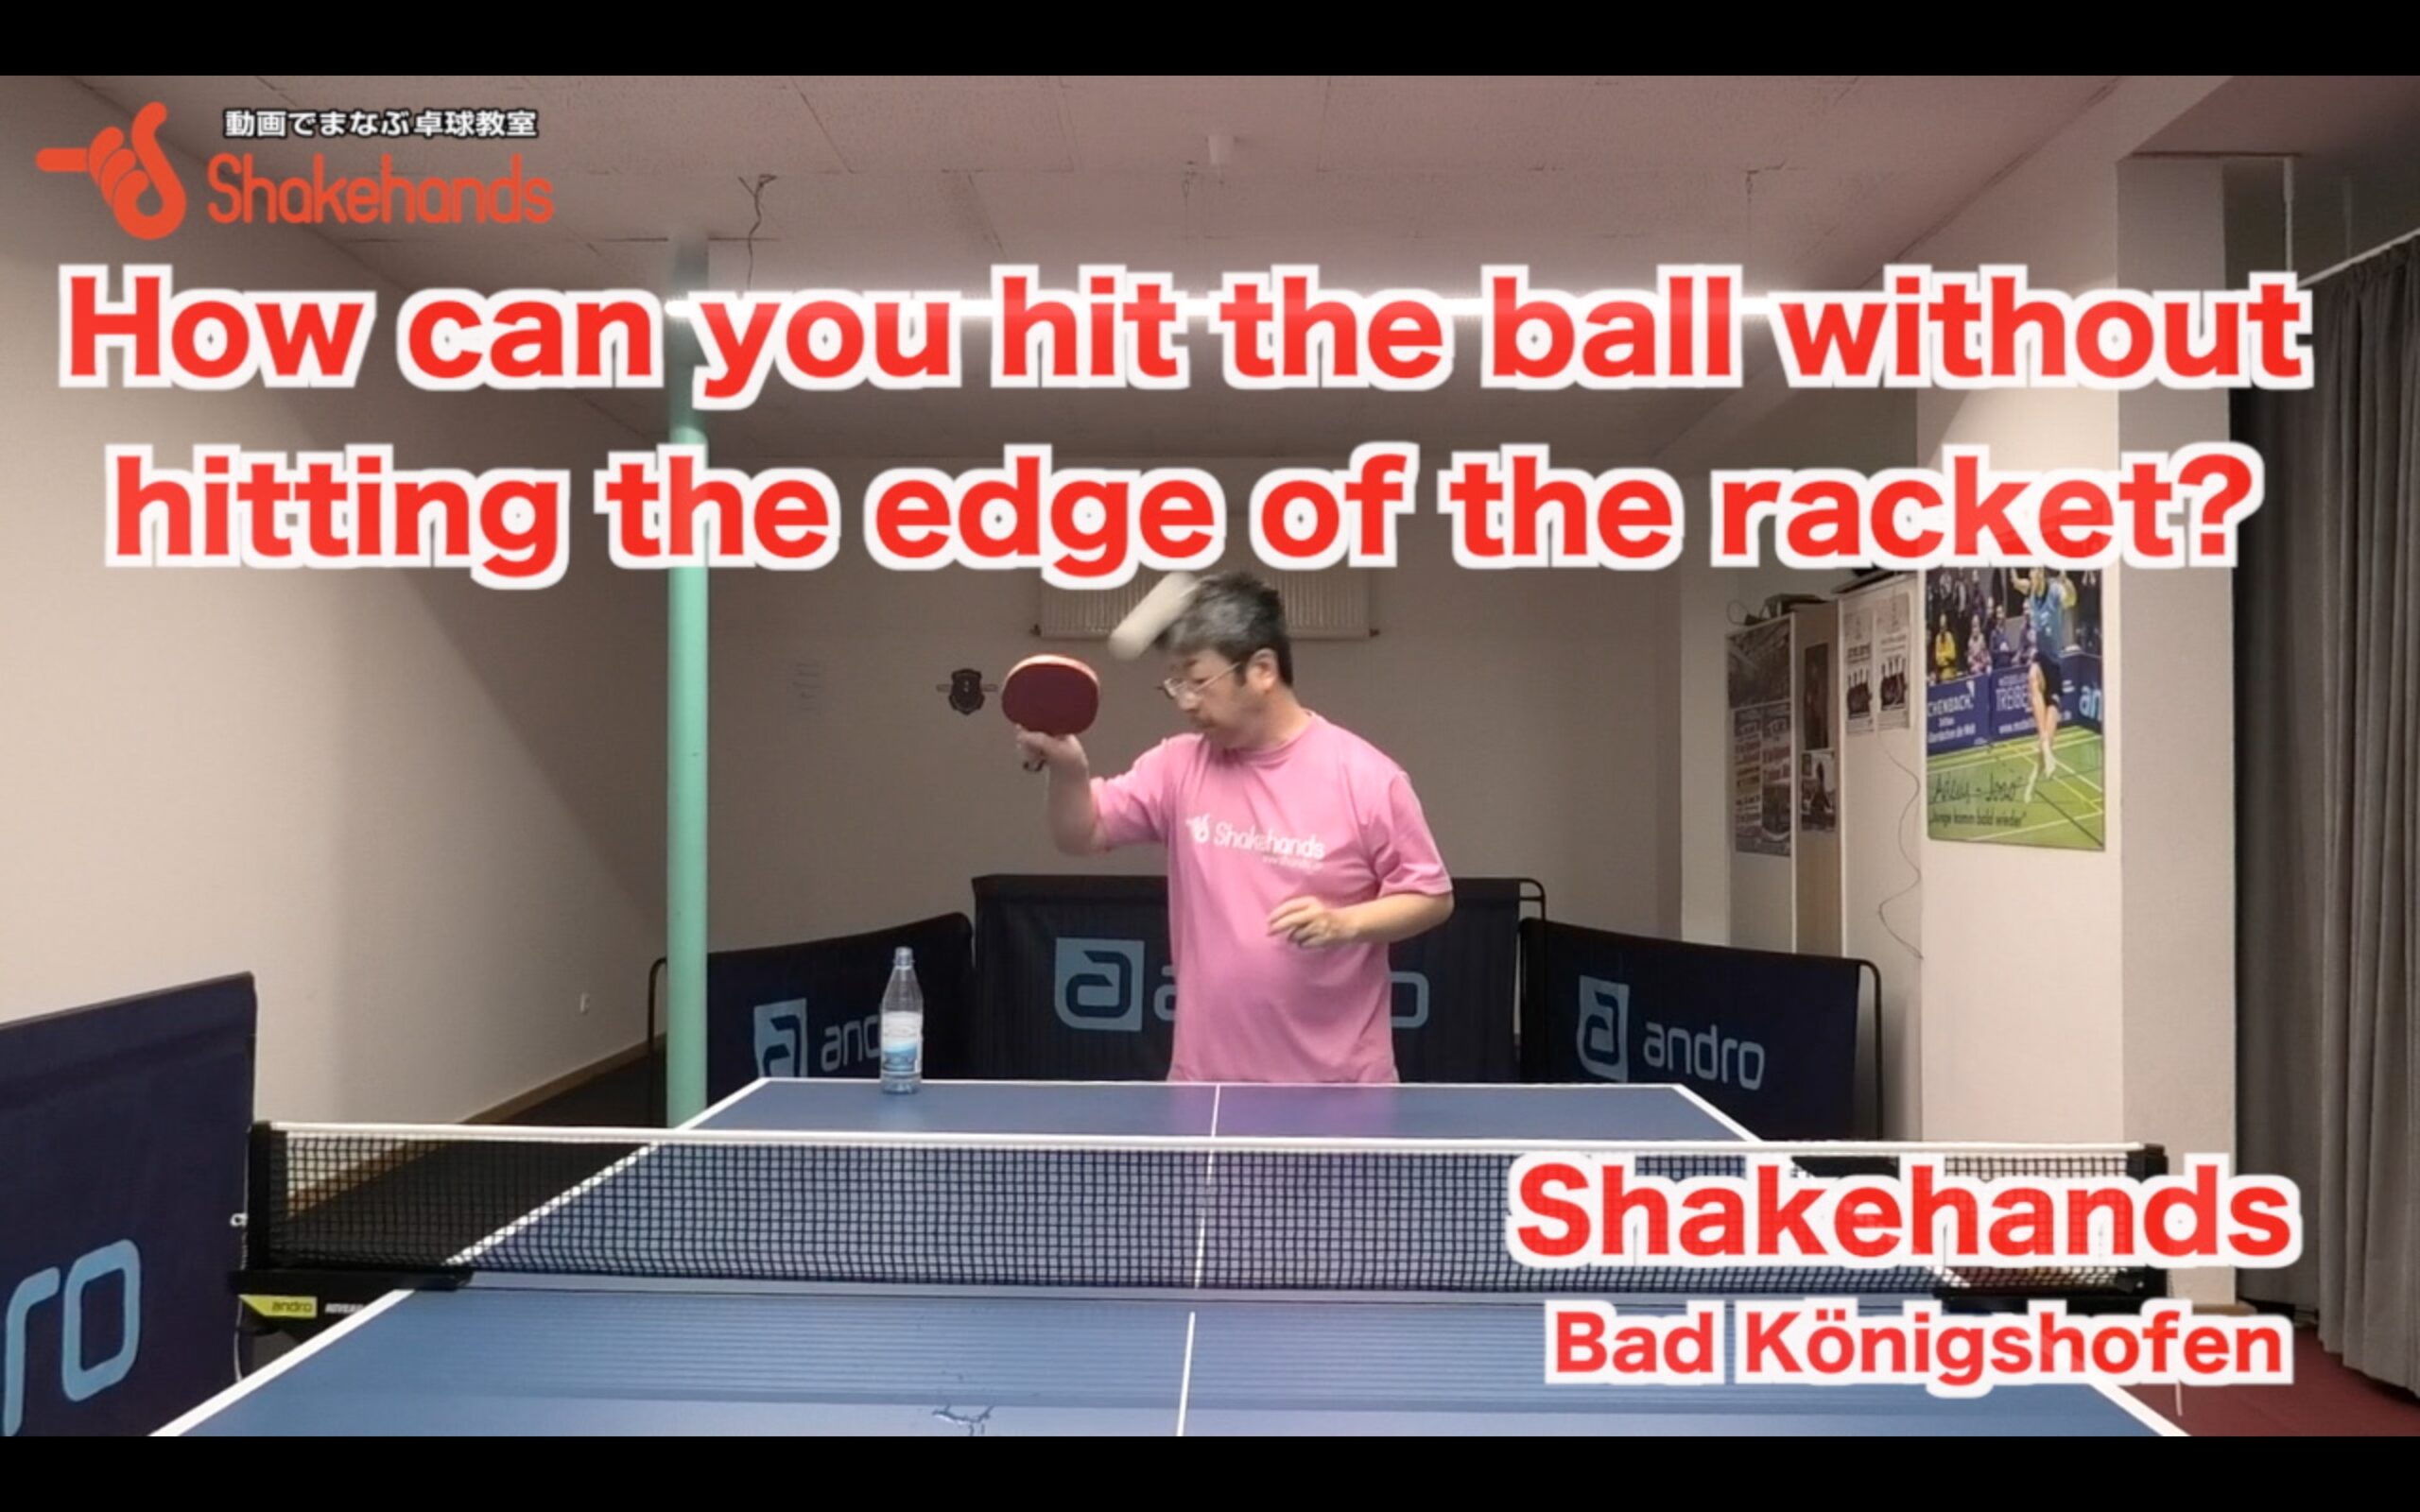 How can you hit the ball without hitting the edge of the racket?